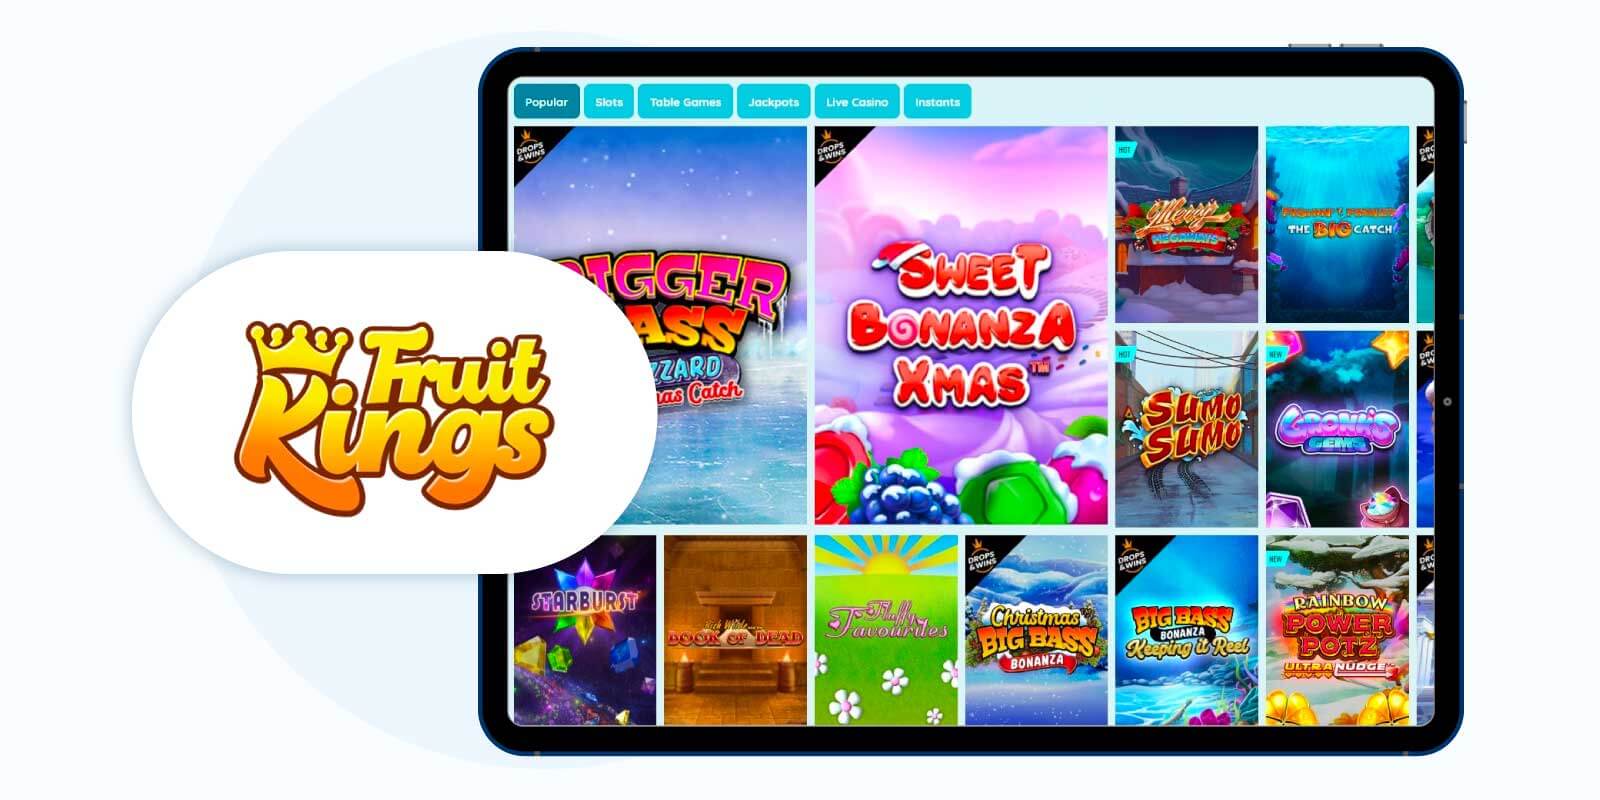 FruitKings - Top Rated Microgaming Casino for Slots